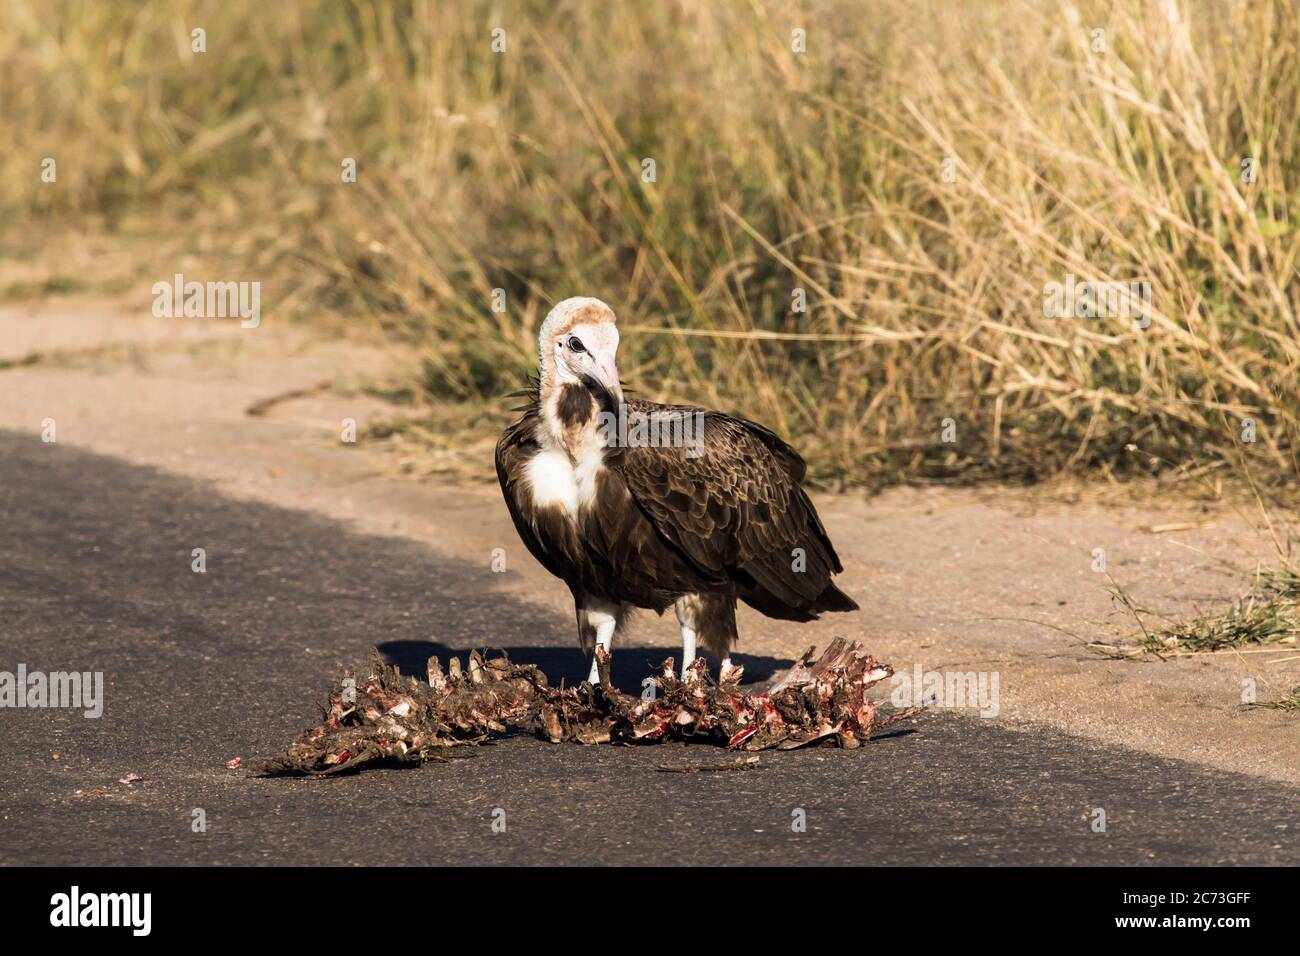 Hooded Vulture eating carcass and lookout on the road, Kruger National Park, Mpumalanga Province, South Africa, Africa Stock Photo